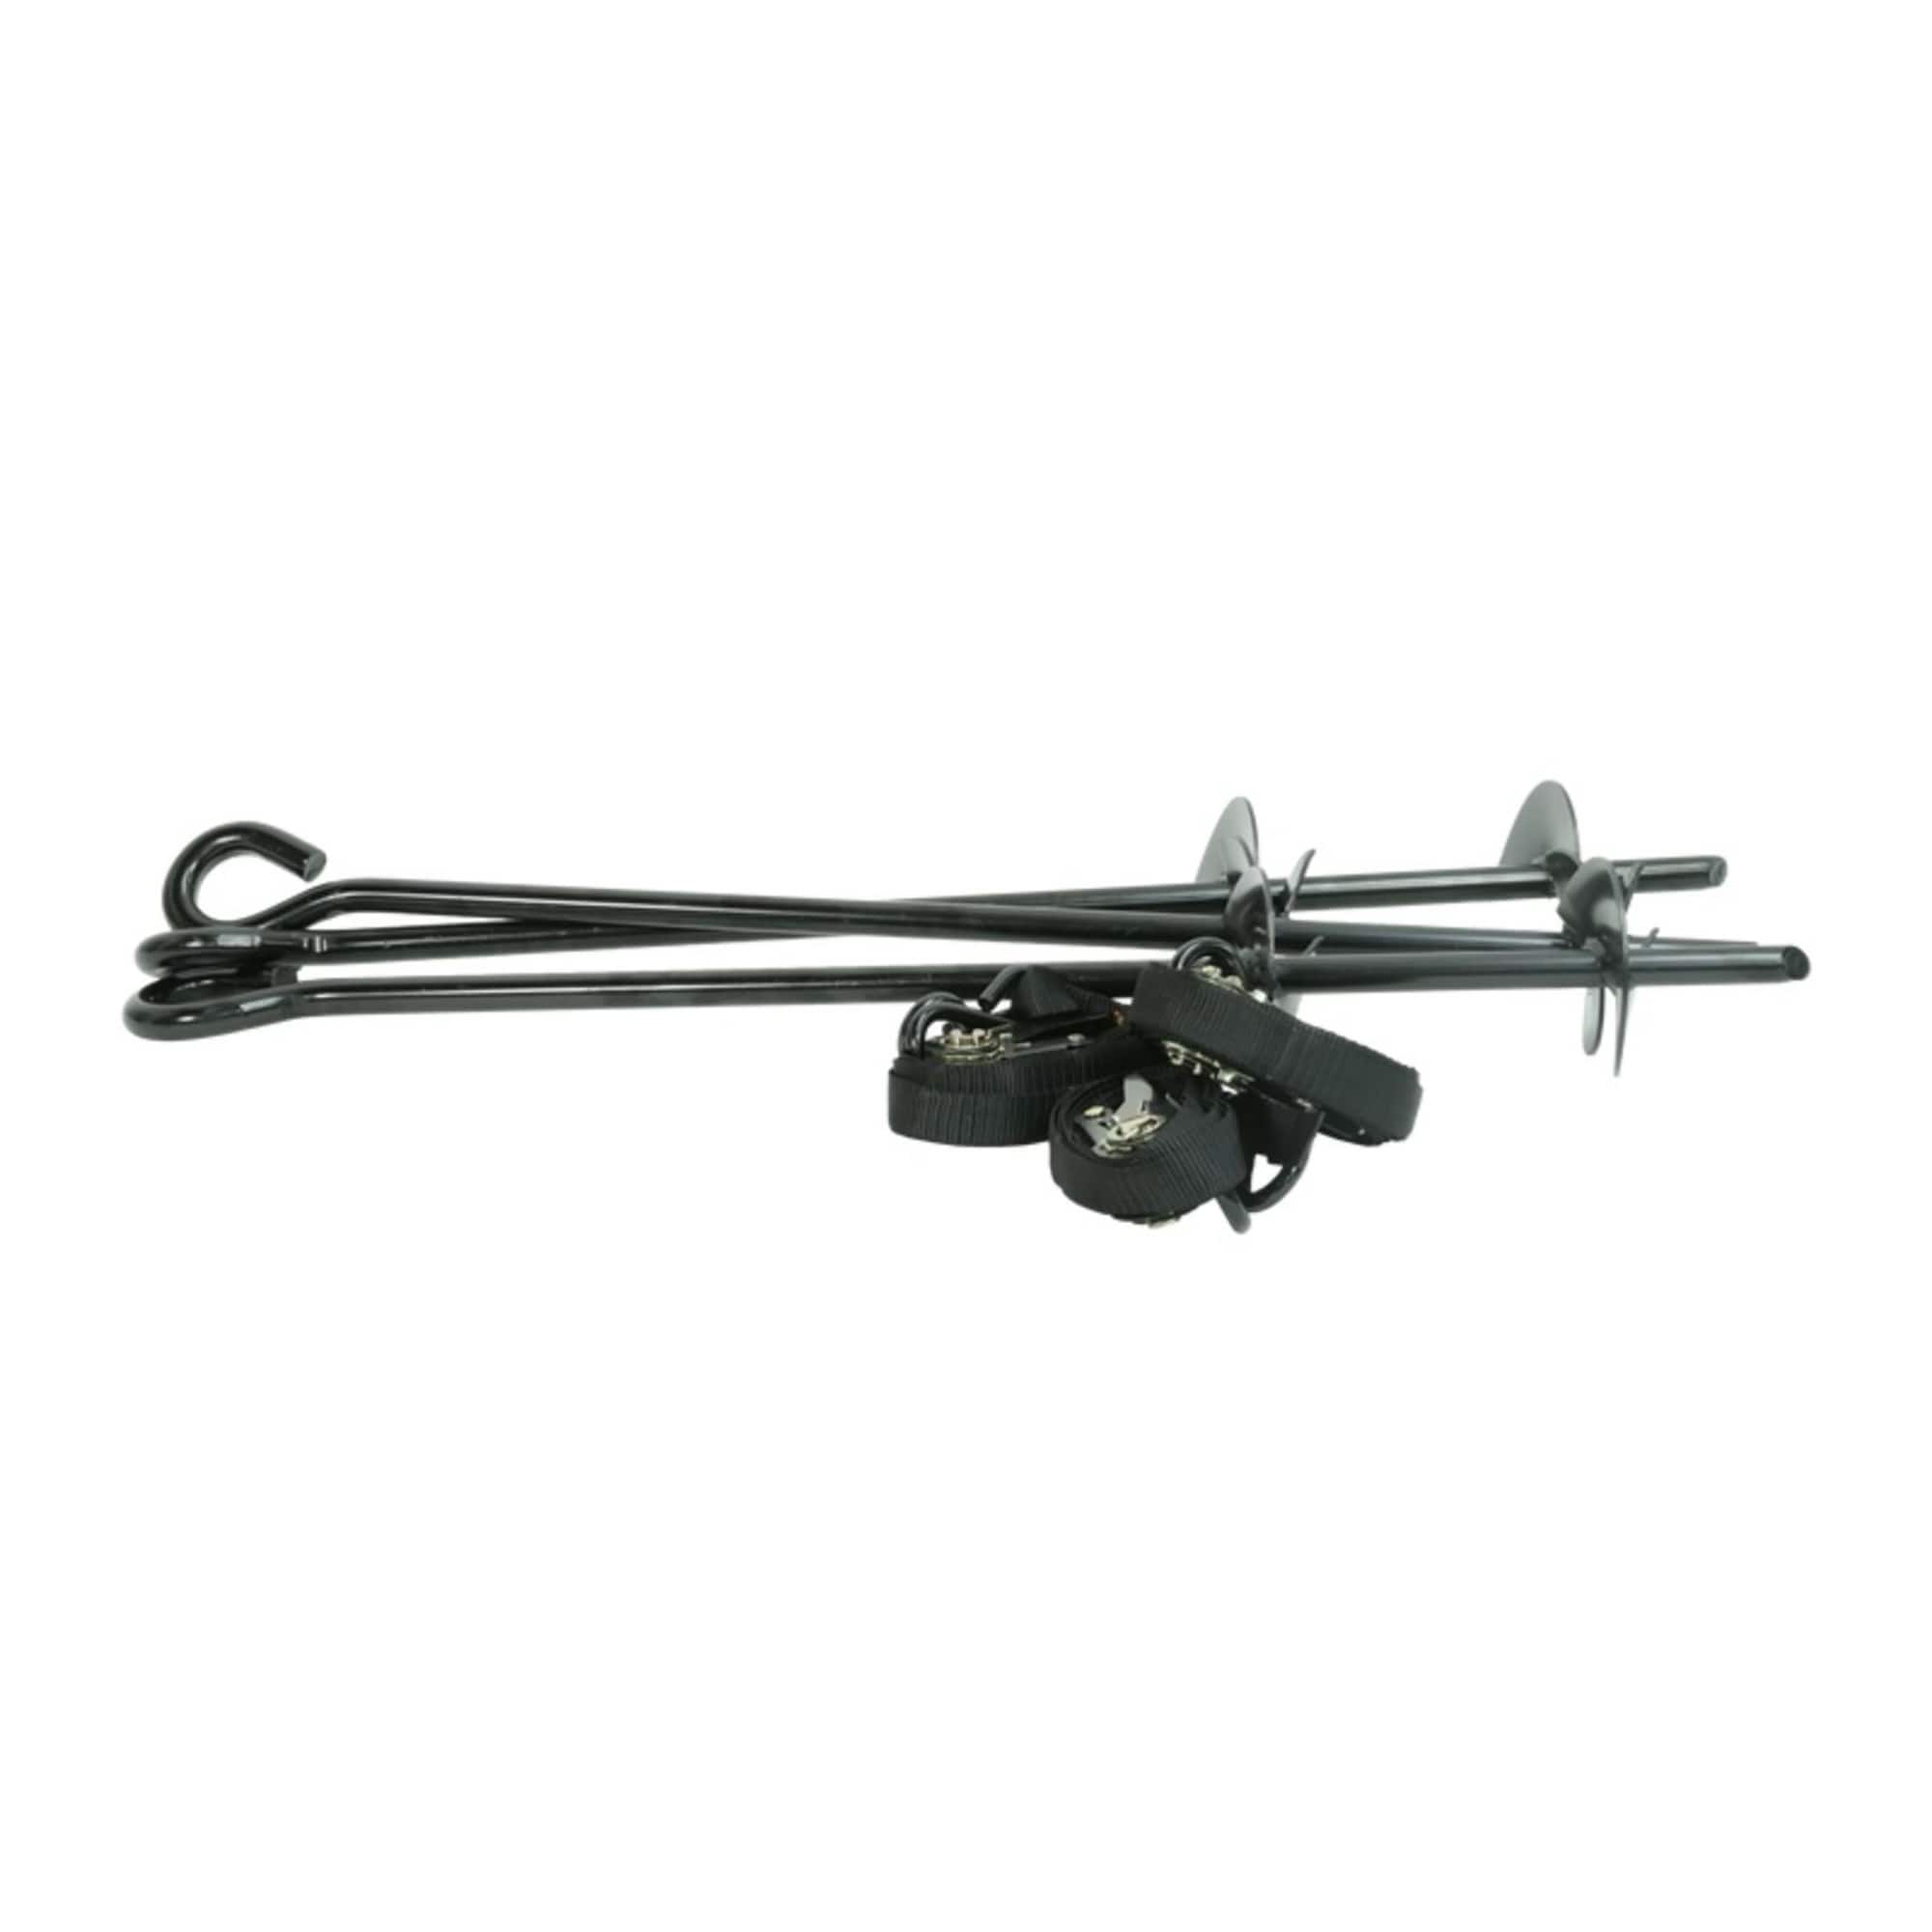 Muddy Muddy Universal Auger Stake For Quadpod And Tripods in the